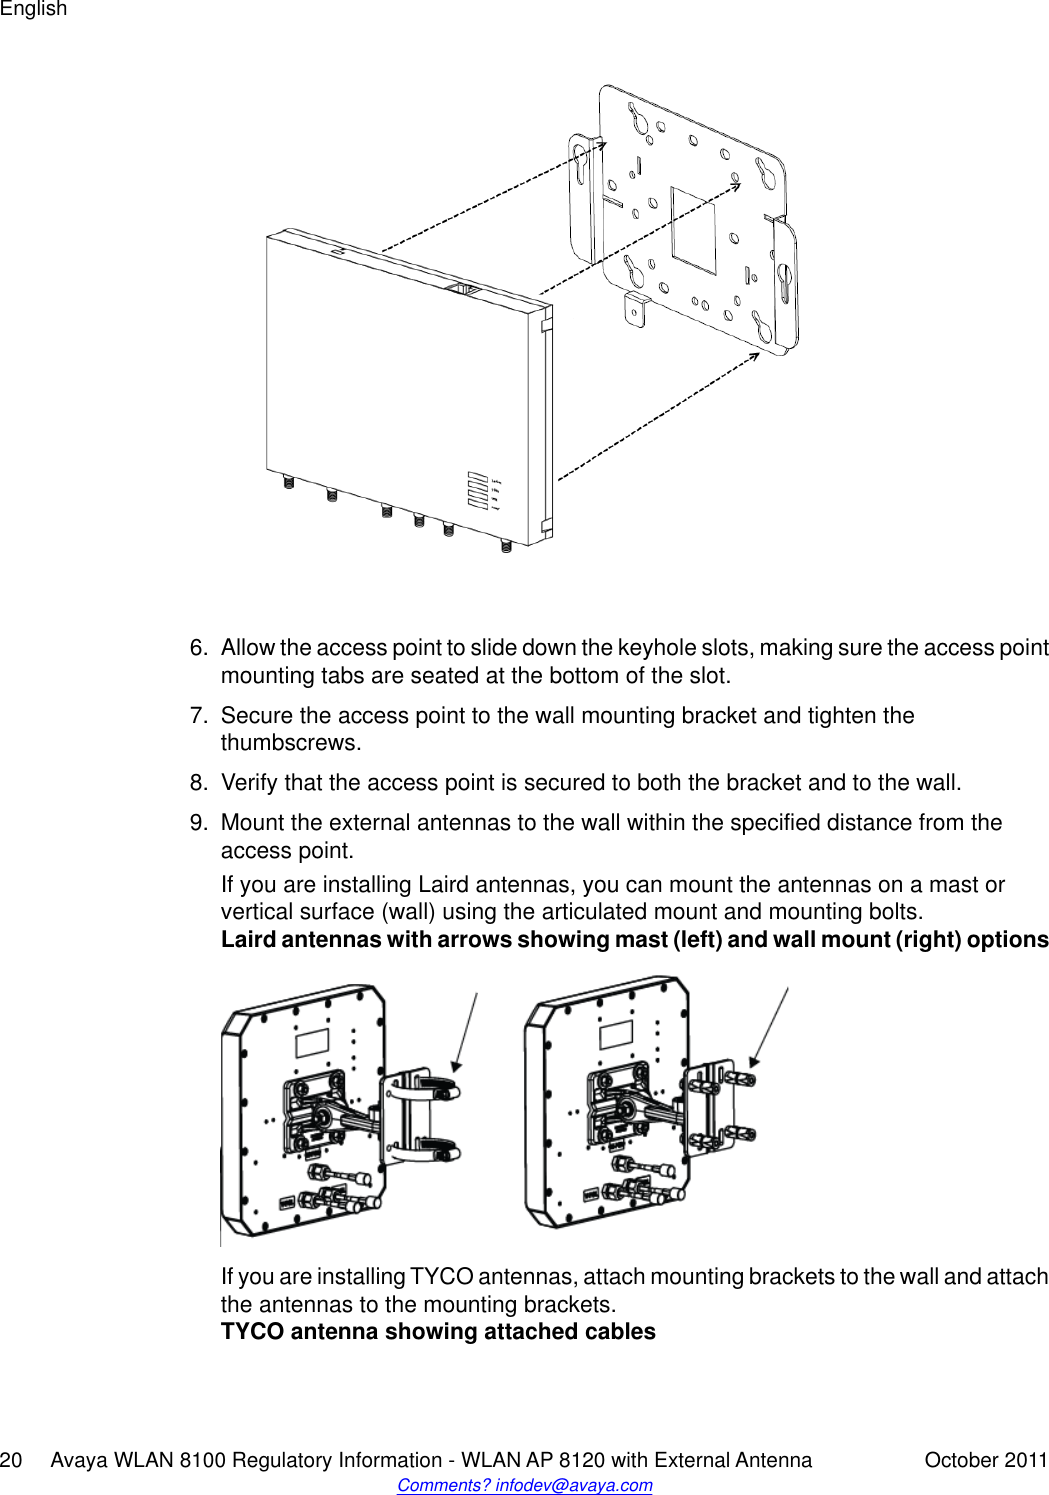 6. Allow the access point to slide down the keyhole slots, making sure the access pointmounting tabs are seated at the bottom of the slot.7. Secure the access point to the wall mounting bracket and tighten thethumbscrews.8. Verify that the access point is secured to both the bracket and to the wall.9. Mount the external antennas to the wall within the specified distance from theaccess point.If you are installing Laird antennas, you can mount the antennas on a mast orvertical surface (wall) using the articulated mount and mounting bolts.Laird antennas with arrows showing mast (left) and wall mount (right) optionsIf you are installing TYCO antennas, attach mounting brackets to the wall and attachthe antennas to the mounting brackets.TYCO antenna showing attached cablesEnglish20     Avaya WLAN 8100 Regulatory Information - WLAN AP 8120 with External Antenna October 2011Comments? infodev@avaya.com